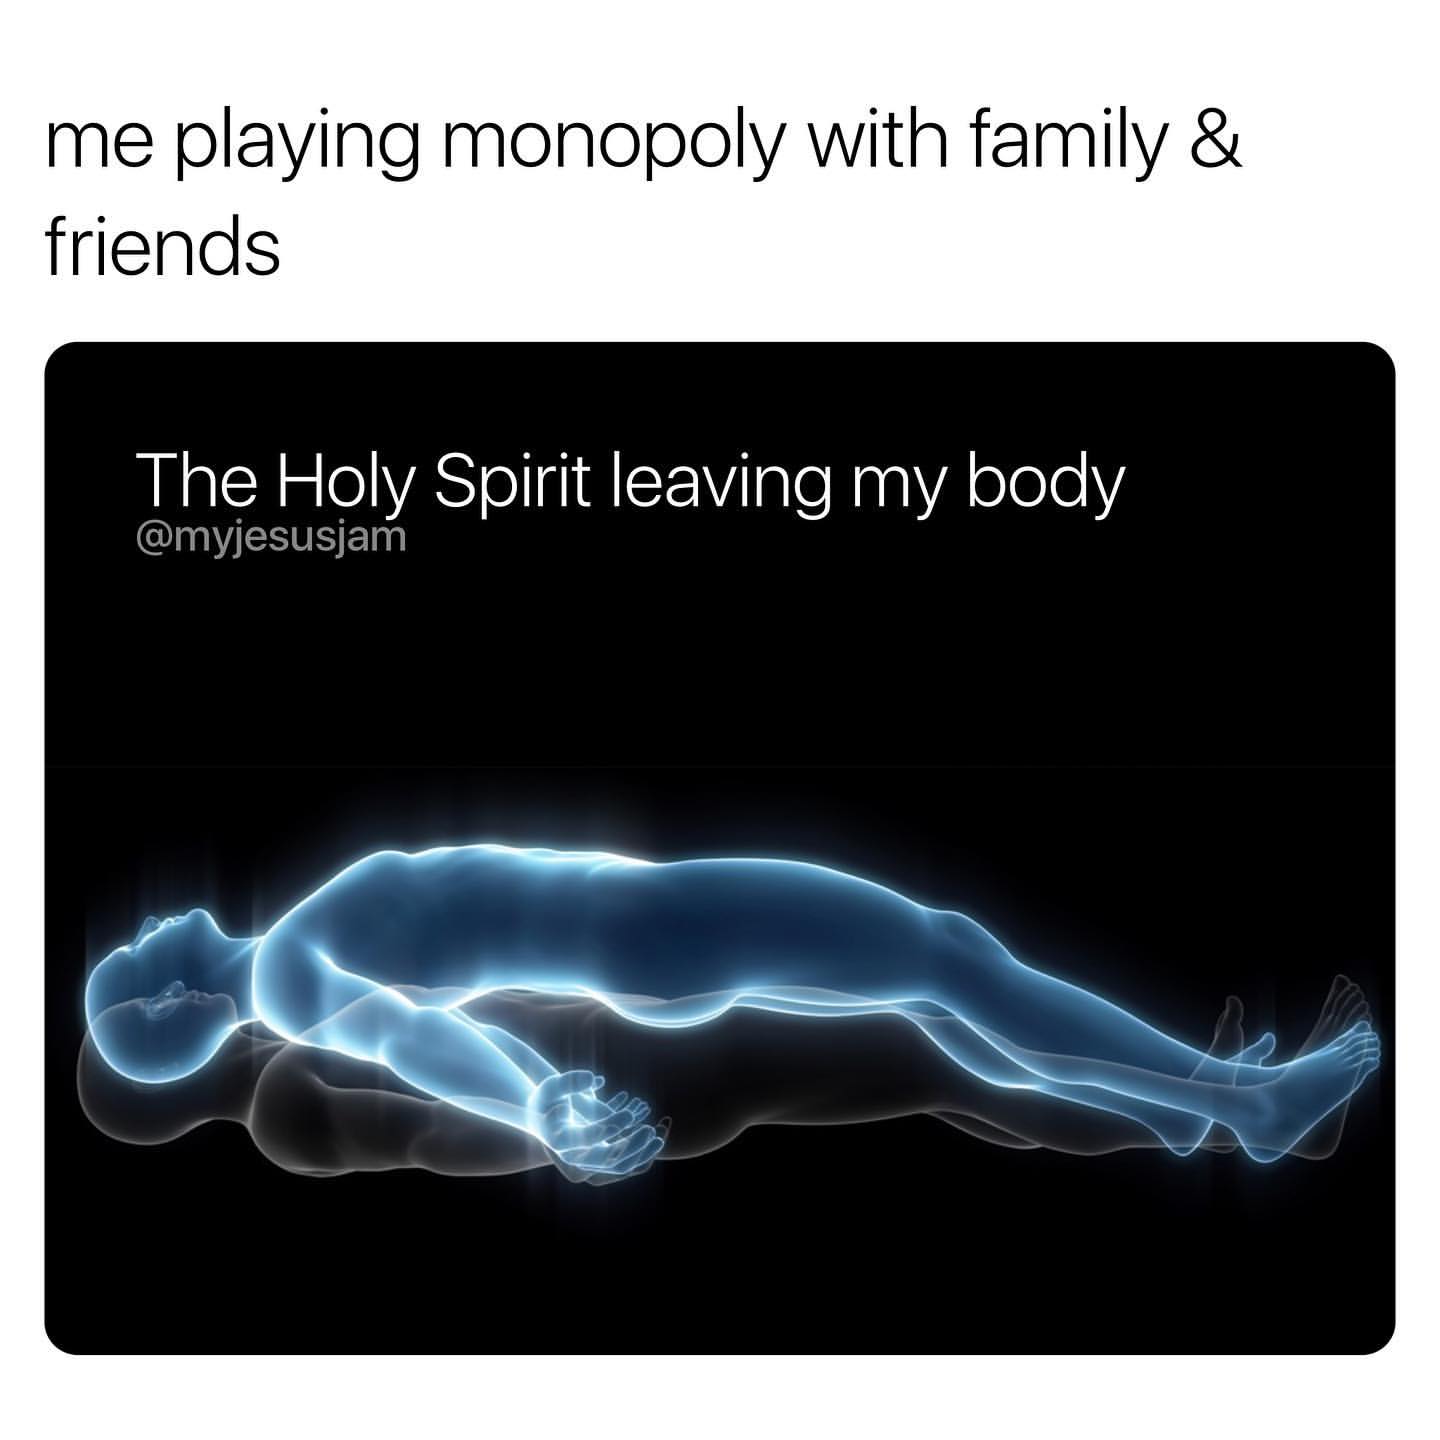 Me playing monopoly with family & friends.  The Holy Spirit leaving my body.